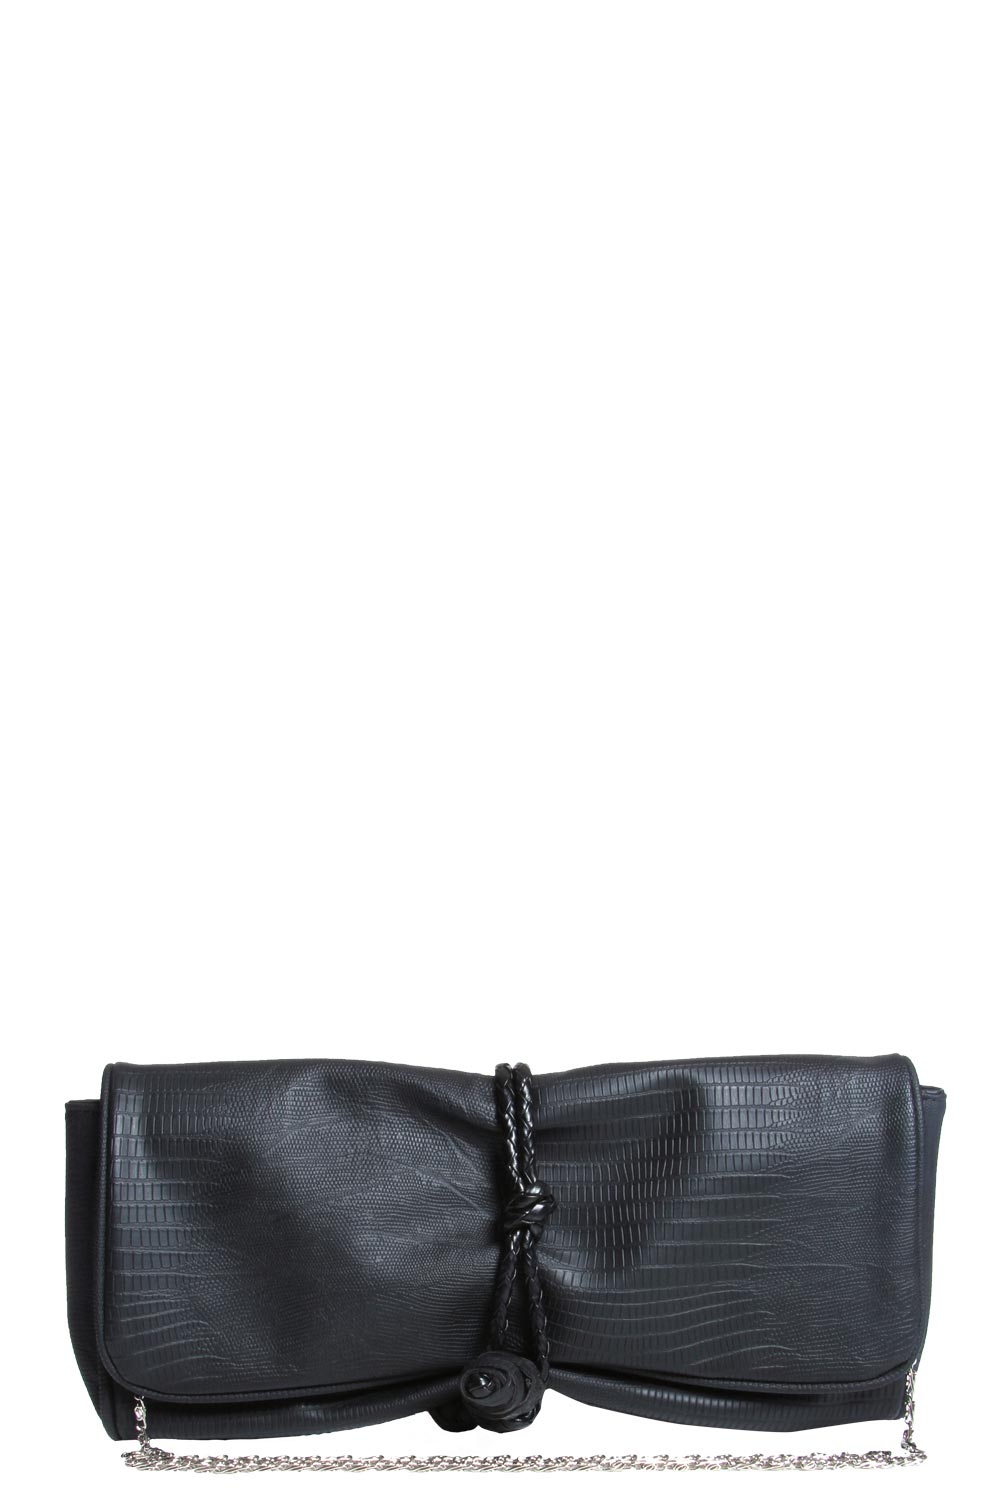 boohoo Shelly Scale Effect Rope Tie Clutch -